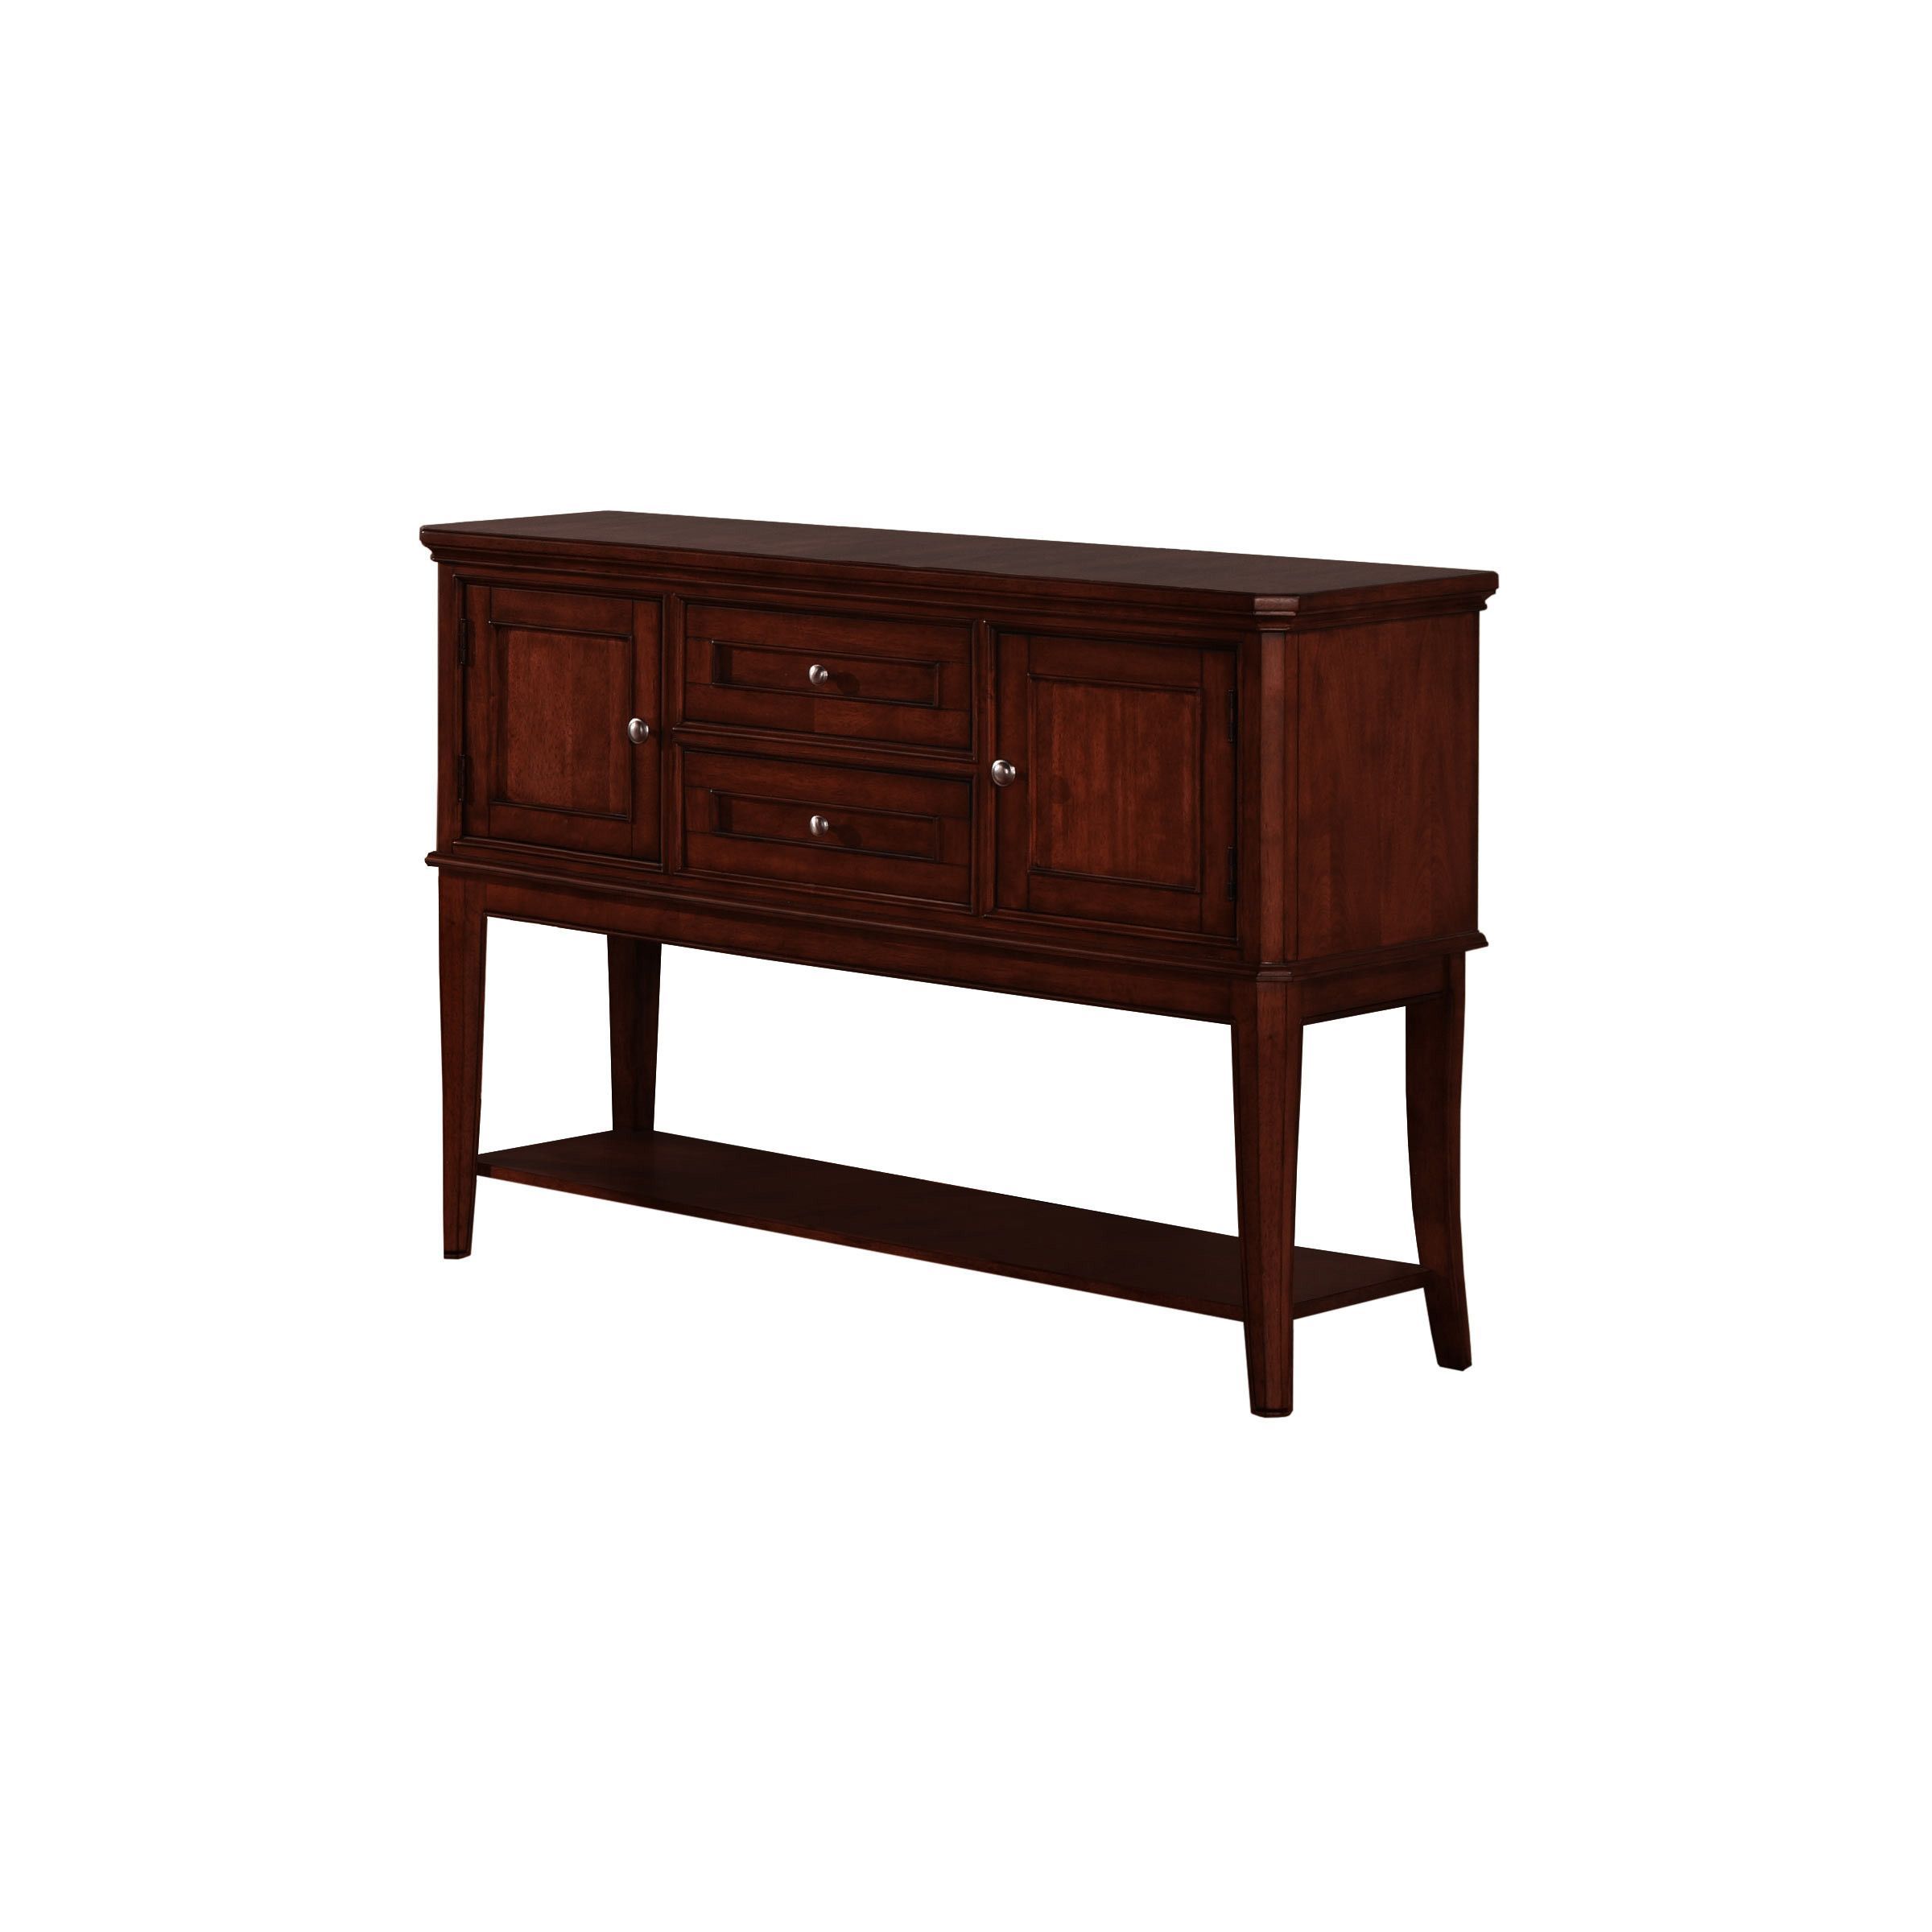 Alcott Hill Chester Server & Reviews | Wayfair | Laurie With Recent Sayles Sideboards (View 12 of 20)